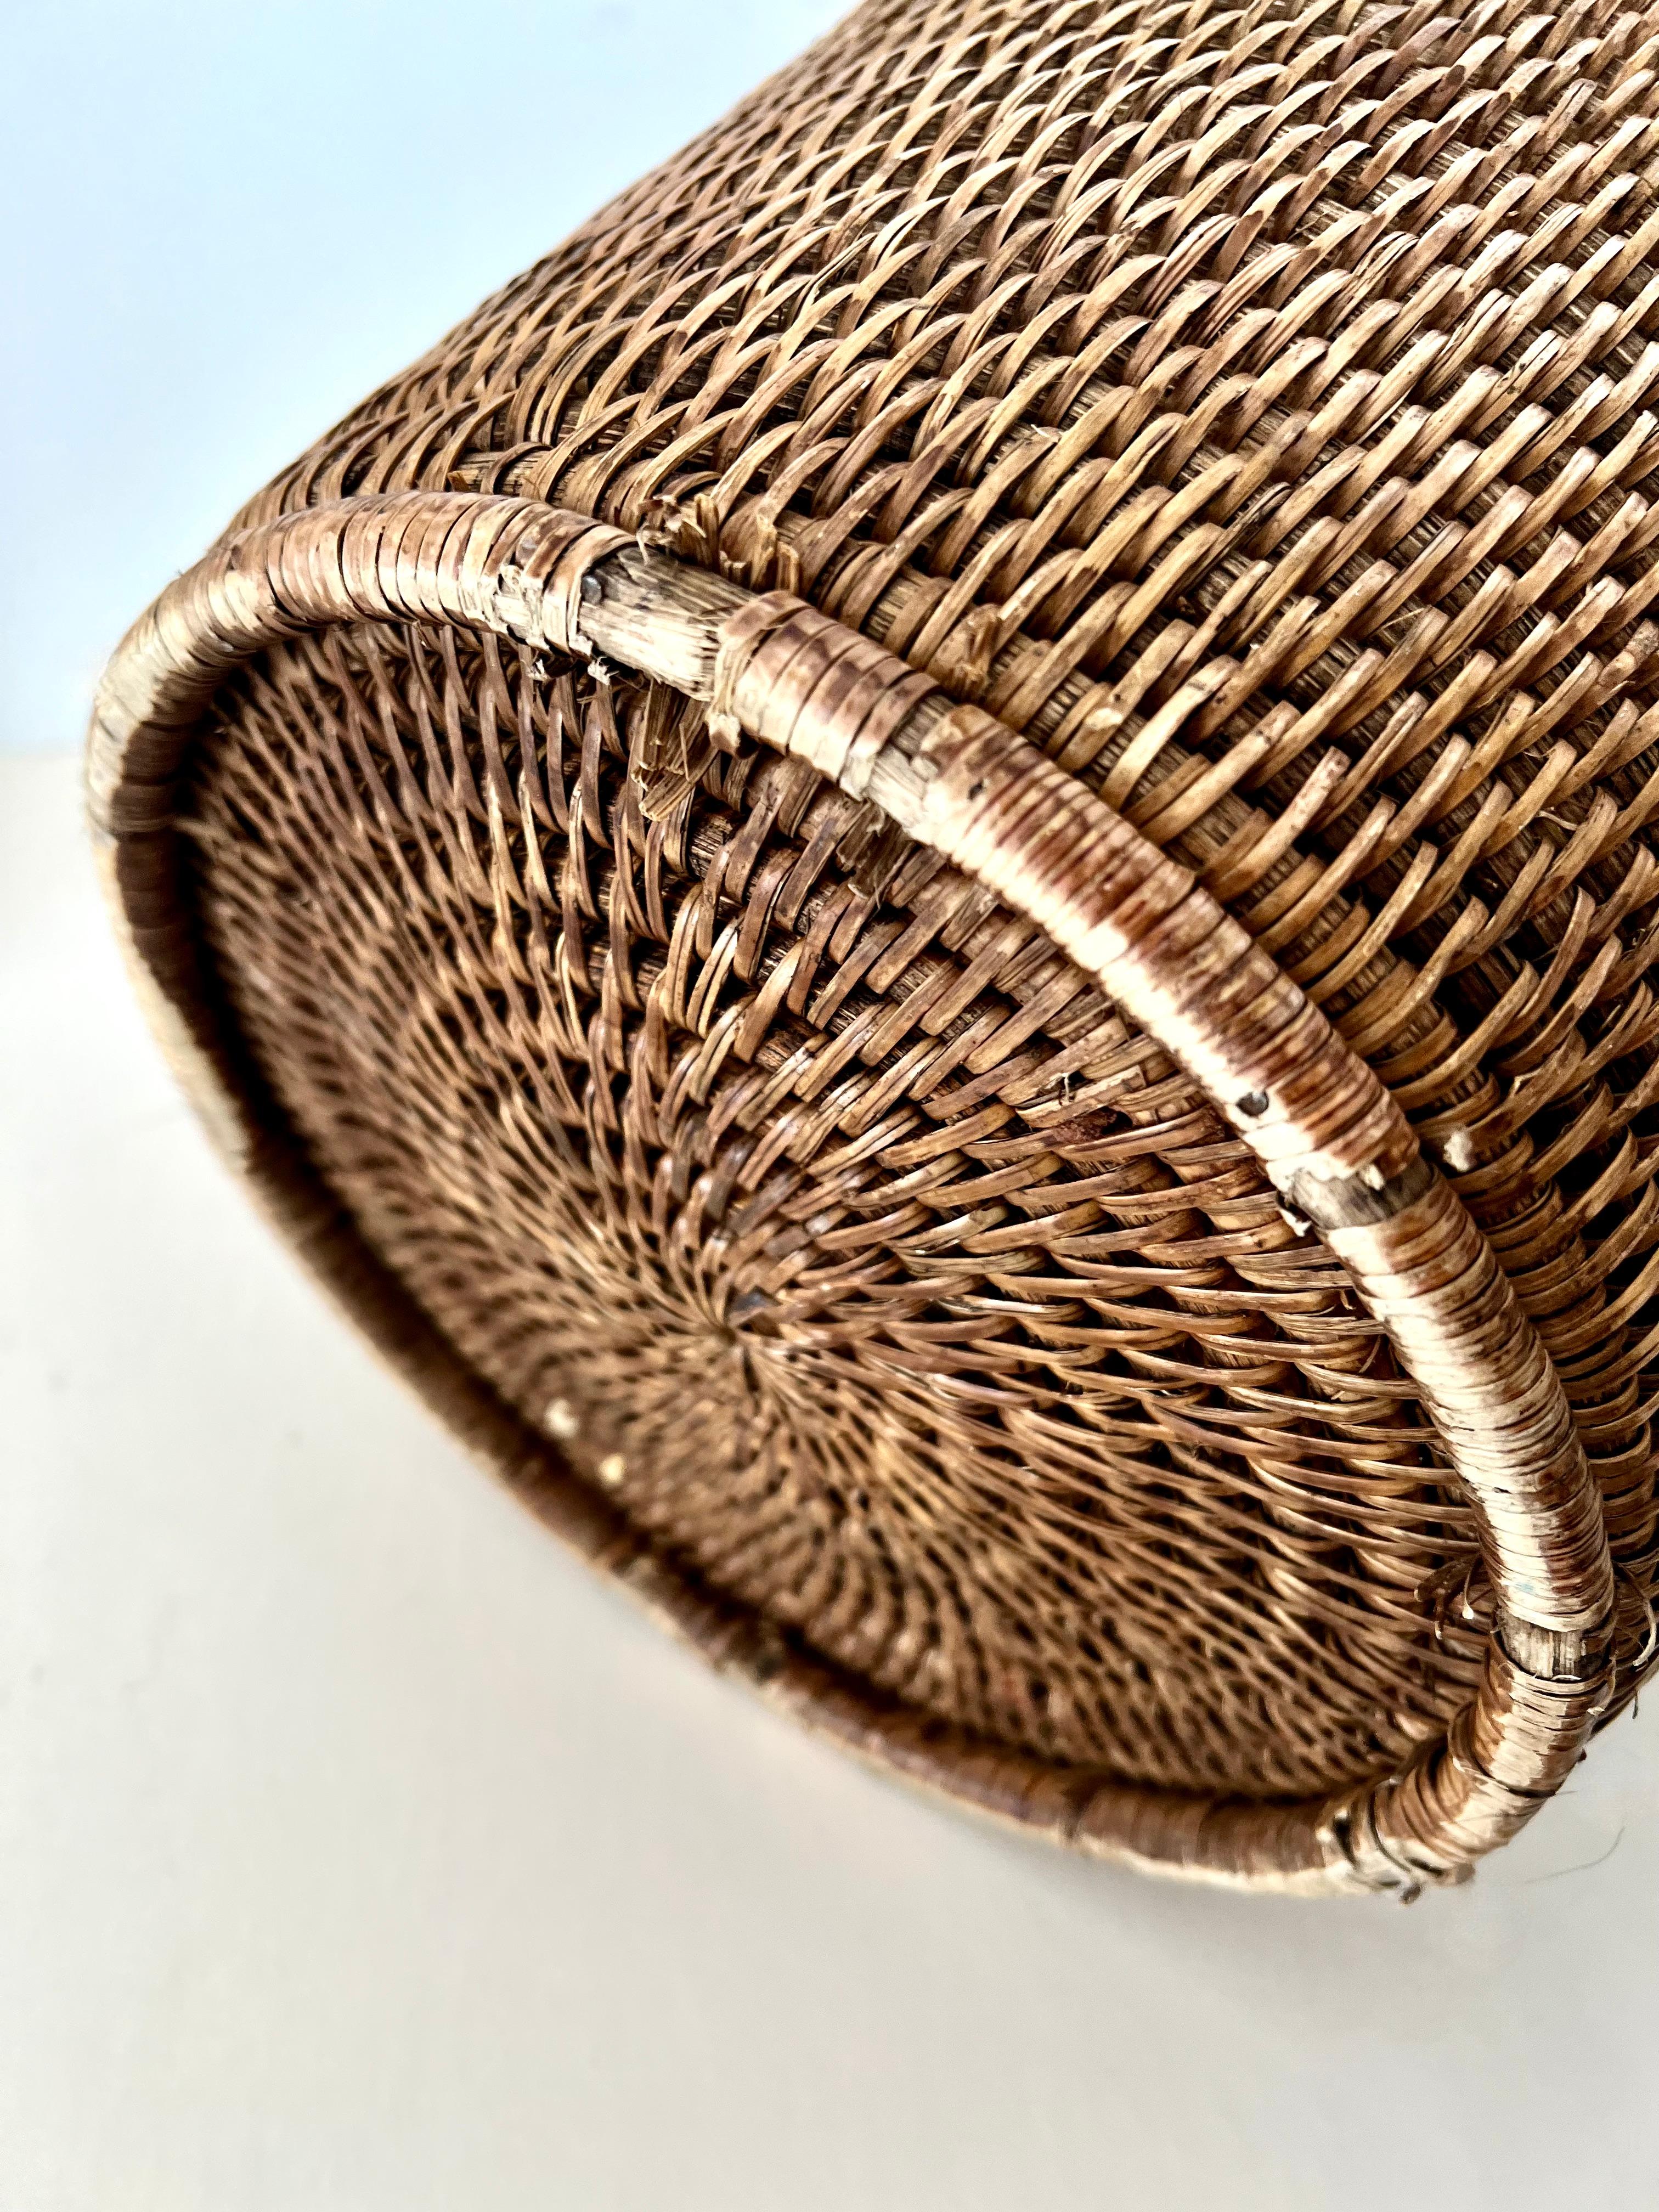 Woven Rattan Waste Basket In Good Condition For Sale In Los Angeles, CA